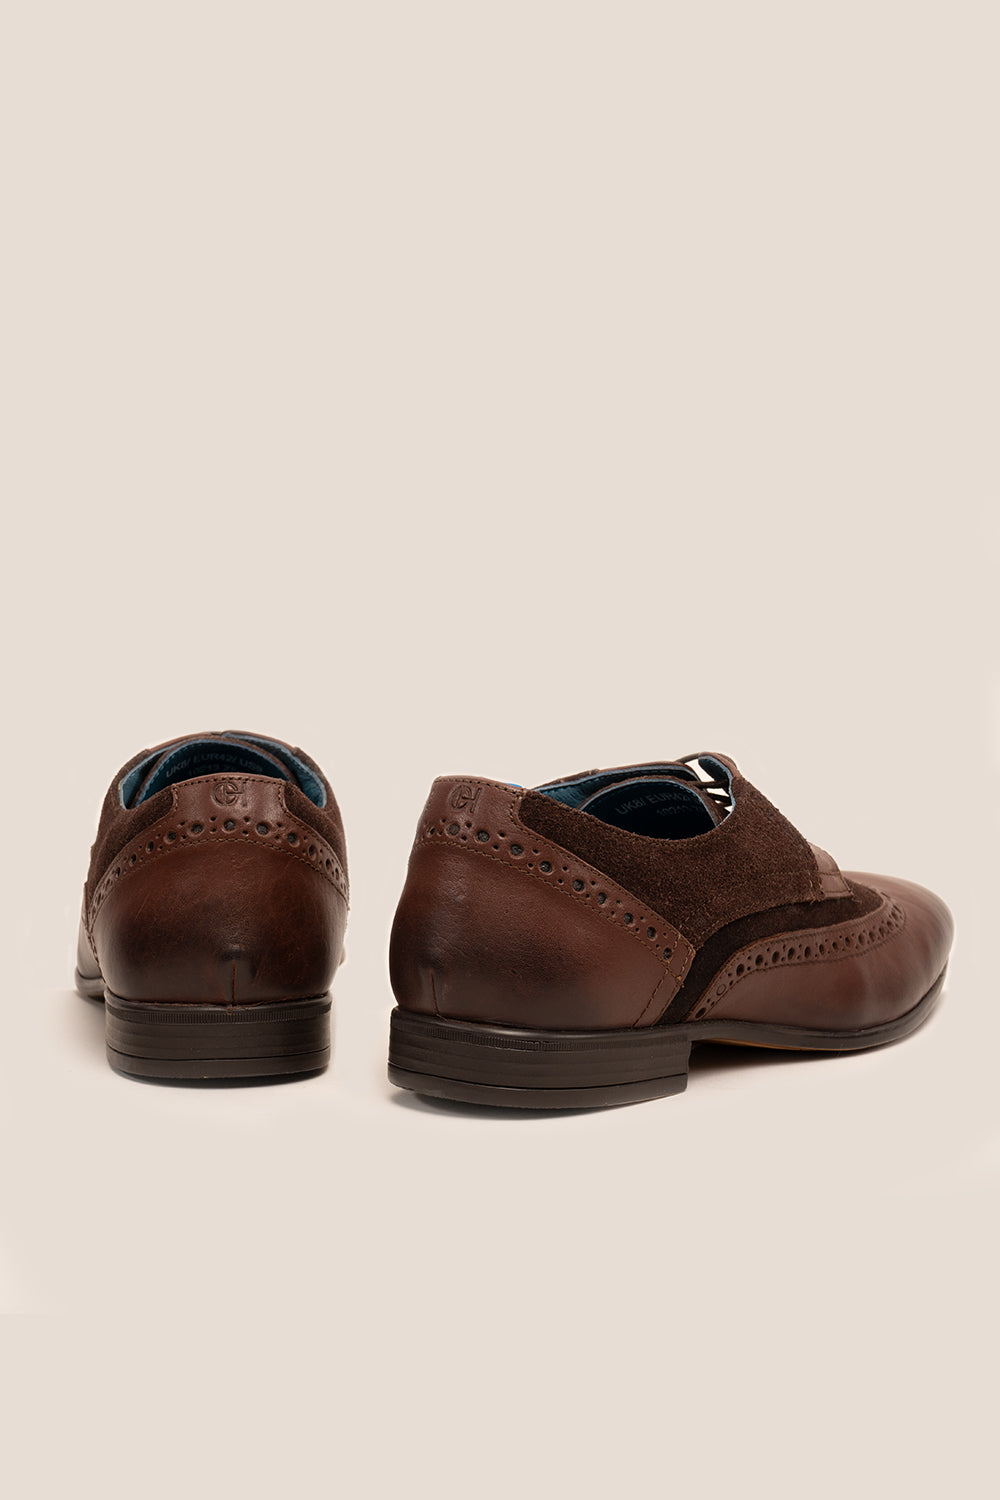 Miles Brown Leather/Suede Brogue Shoes Oswin Hyde